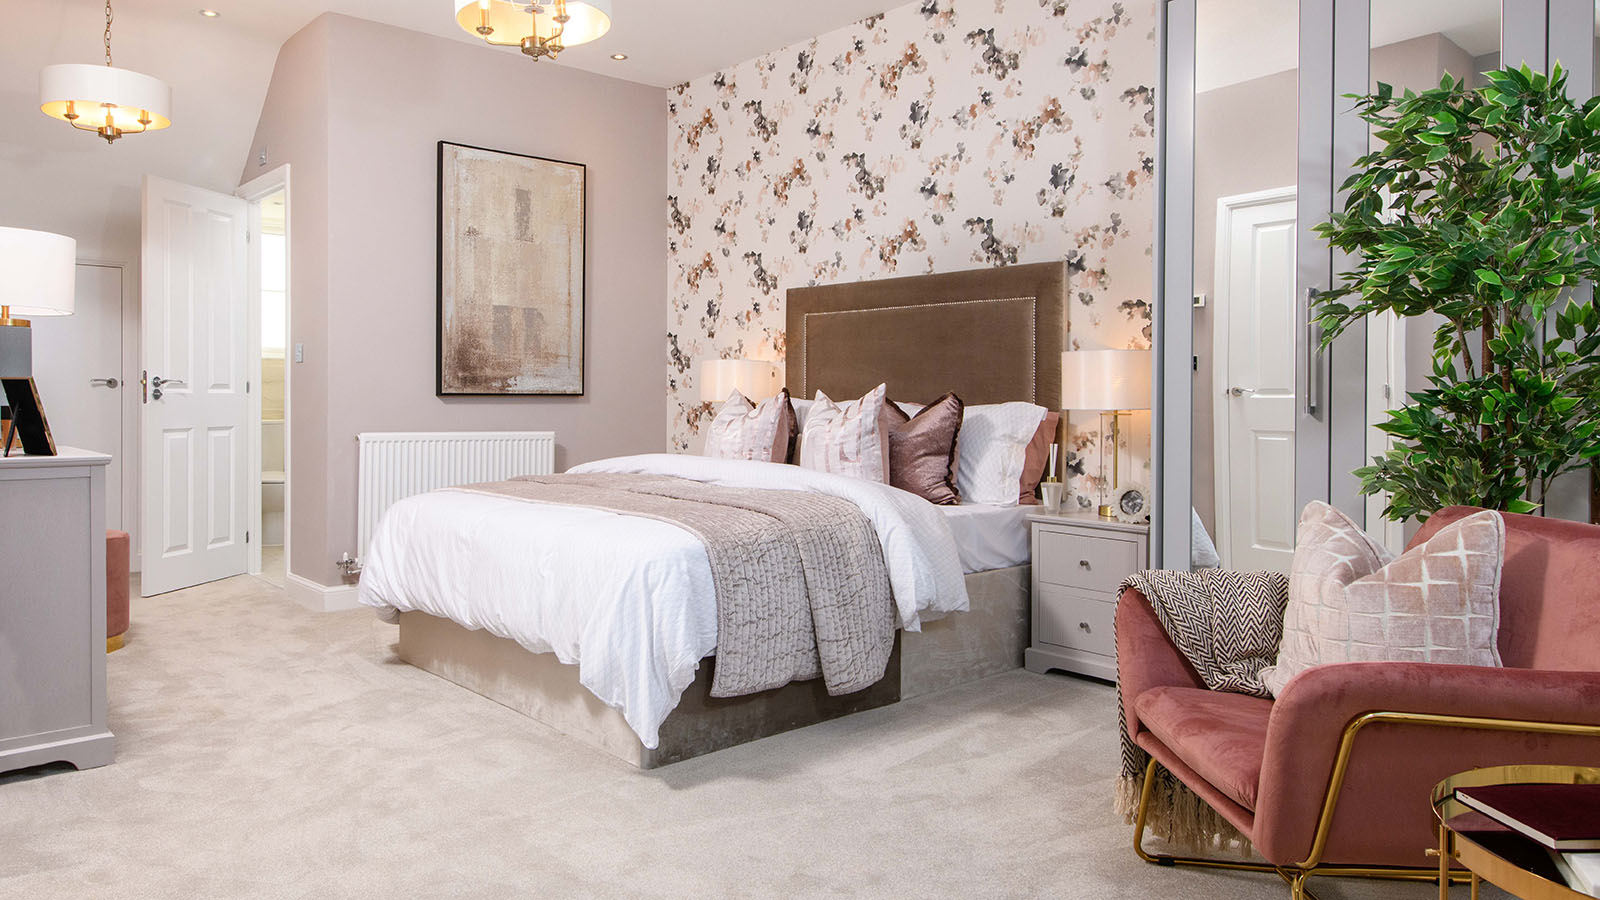 The ‘Hesketh’ show home at Ashlawn Gardens